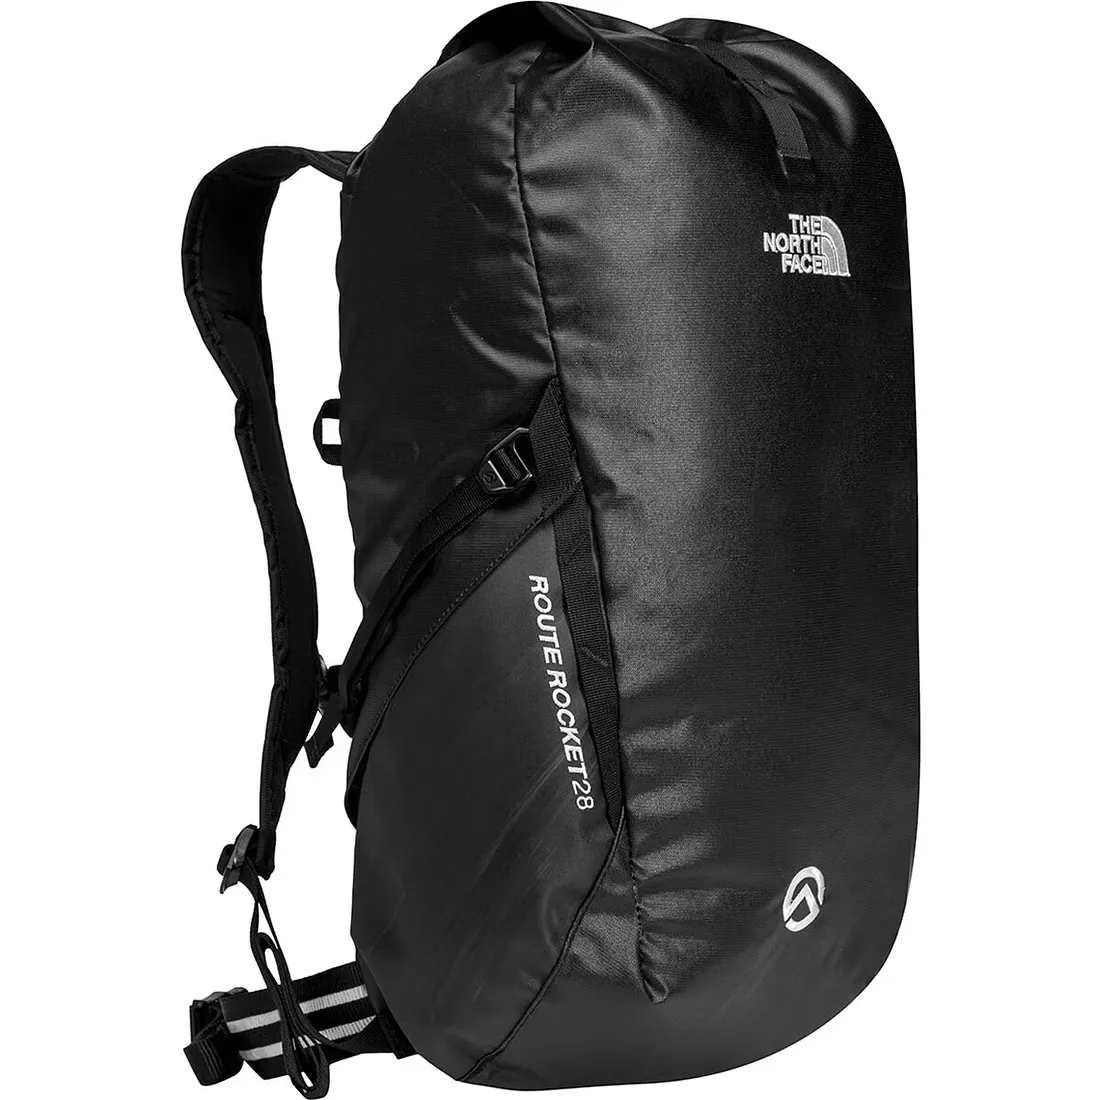 The North Face Route Rocket Climbing Backpack